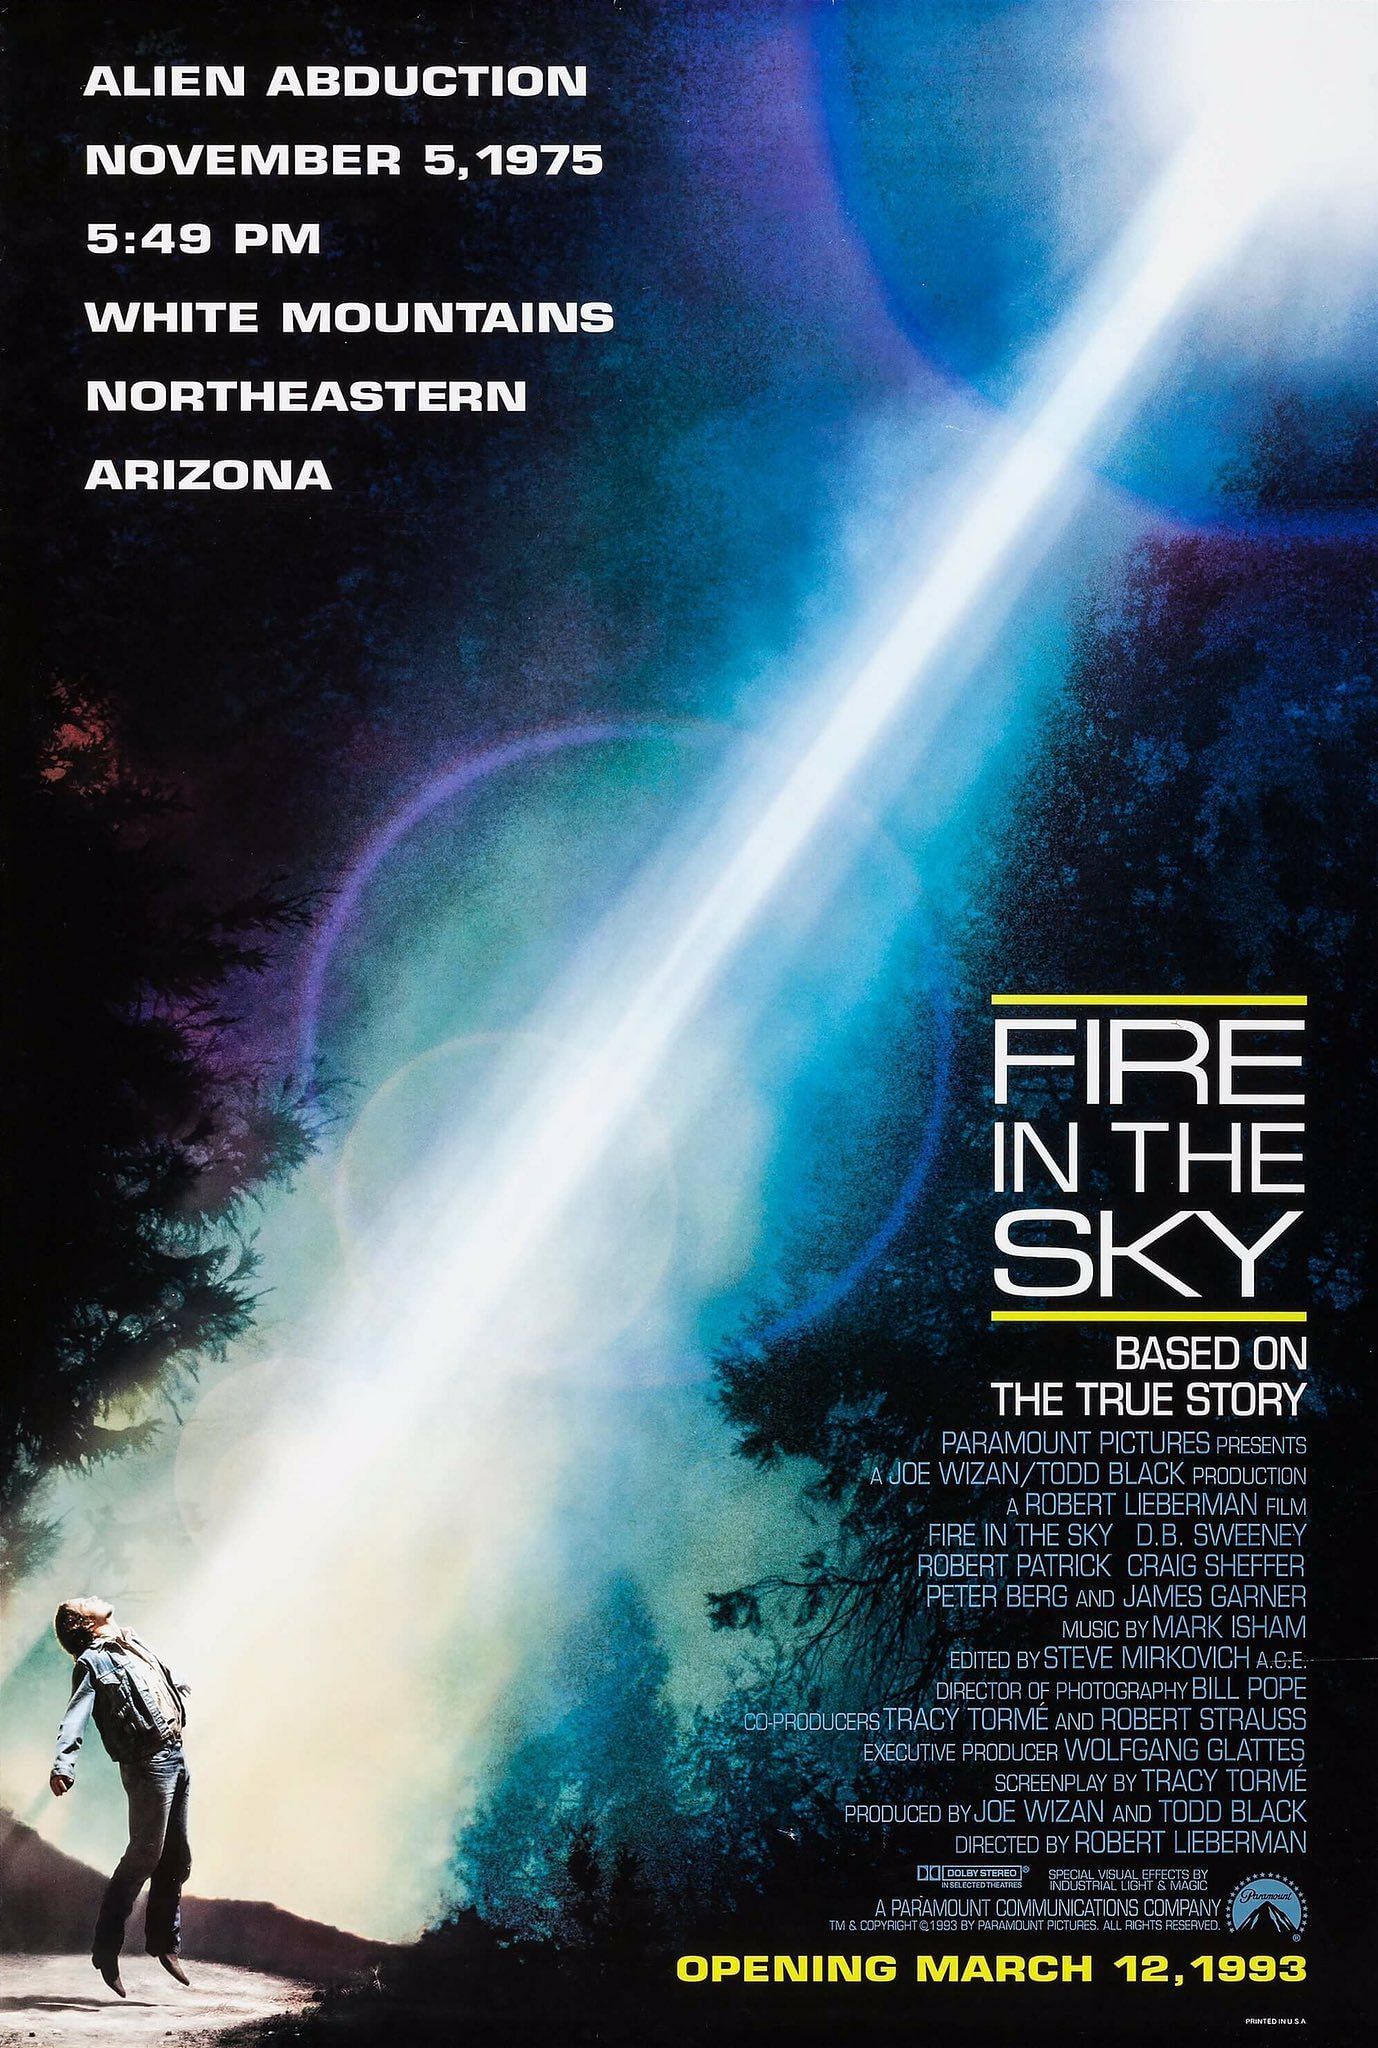 Fire in the Sky (Image via Paramount)